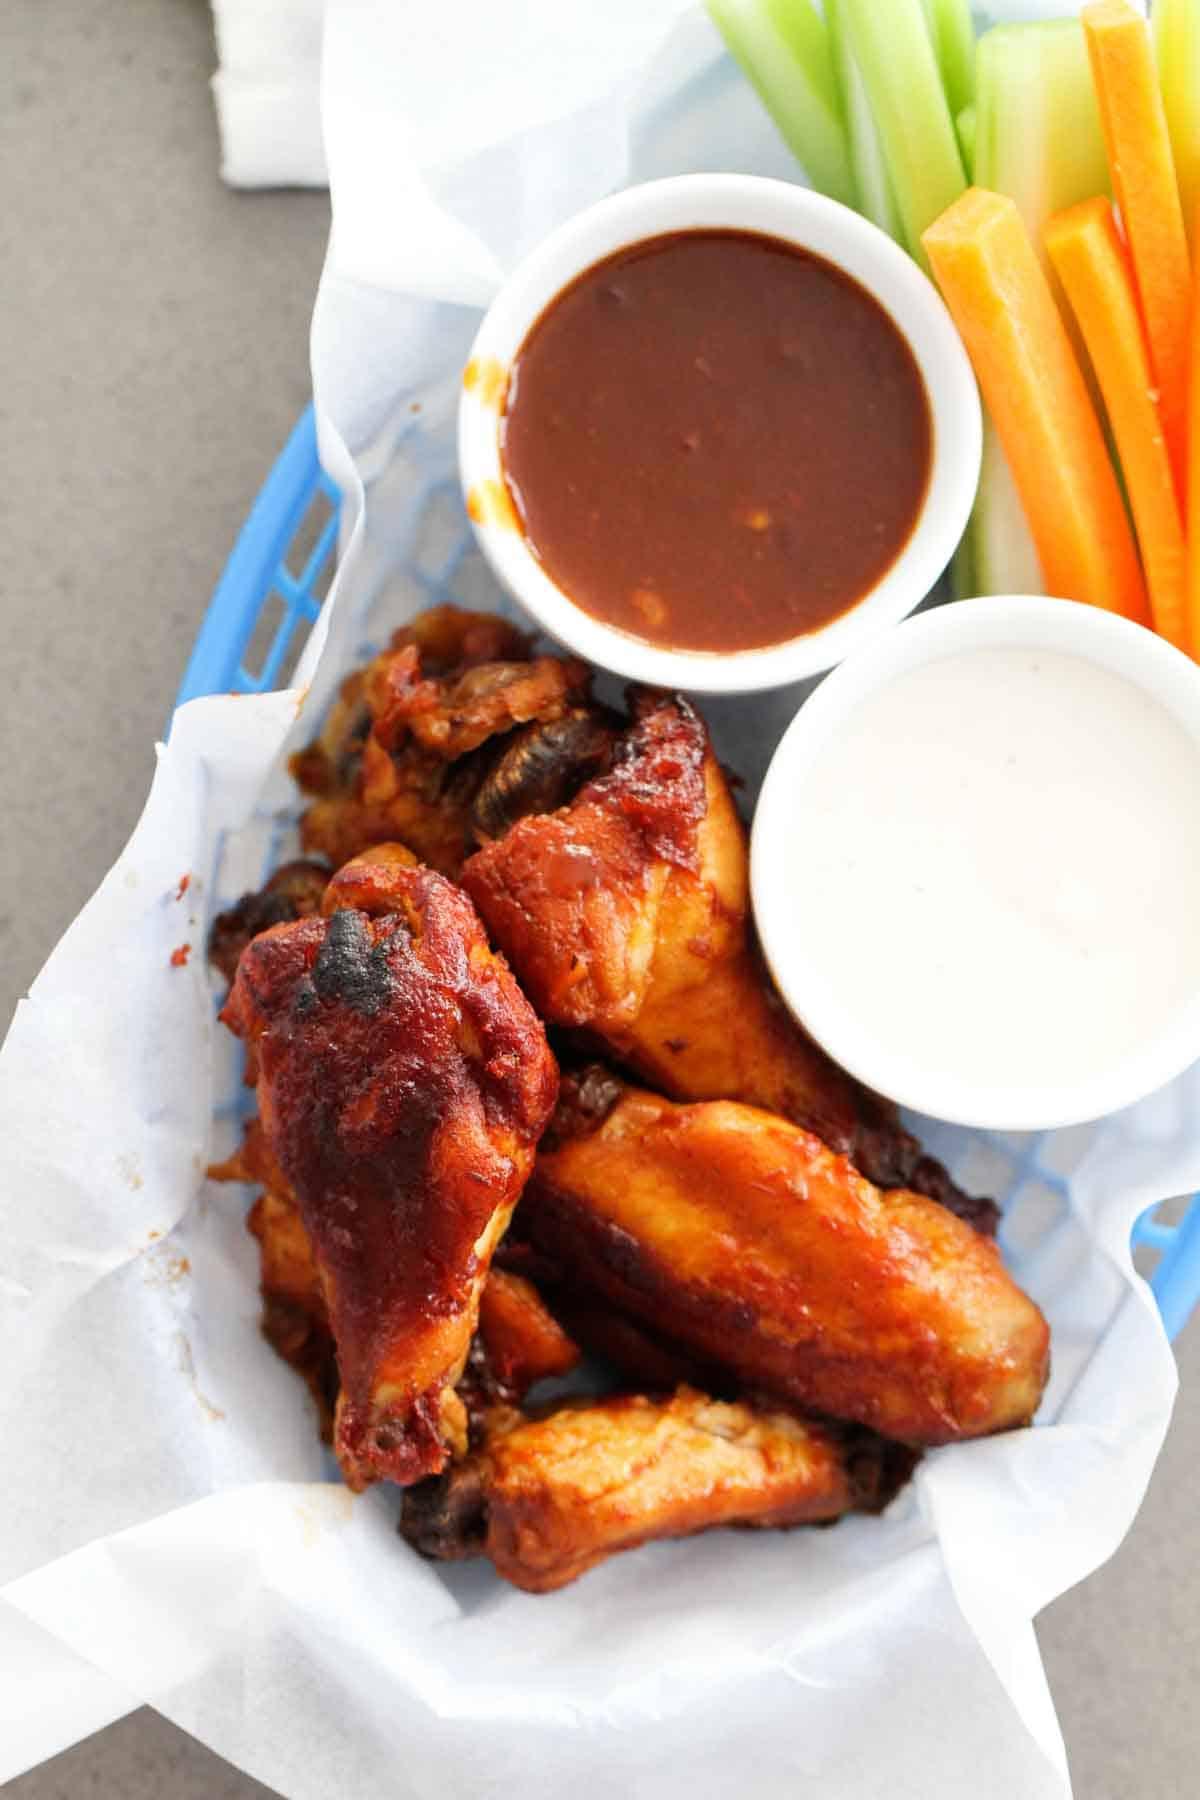 Slow Cooker Honey BBQ Chicken Wings Recipe - The Cookie Rookie®